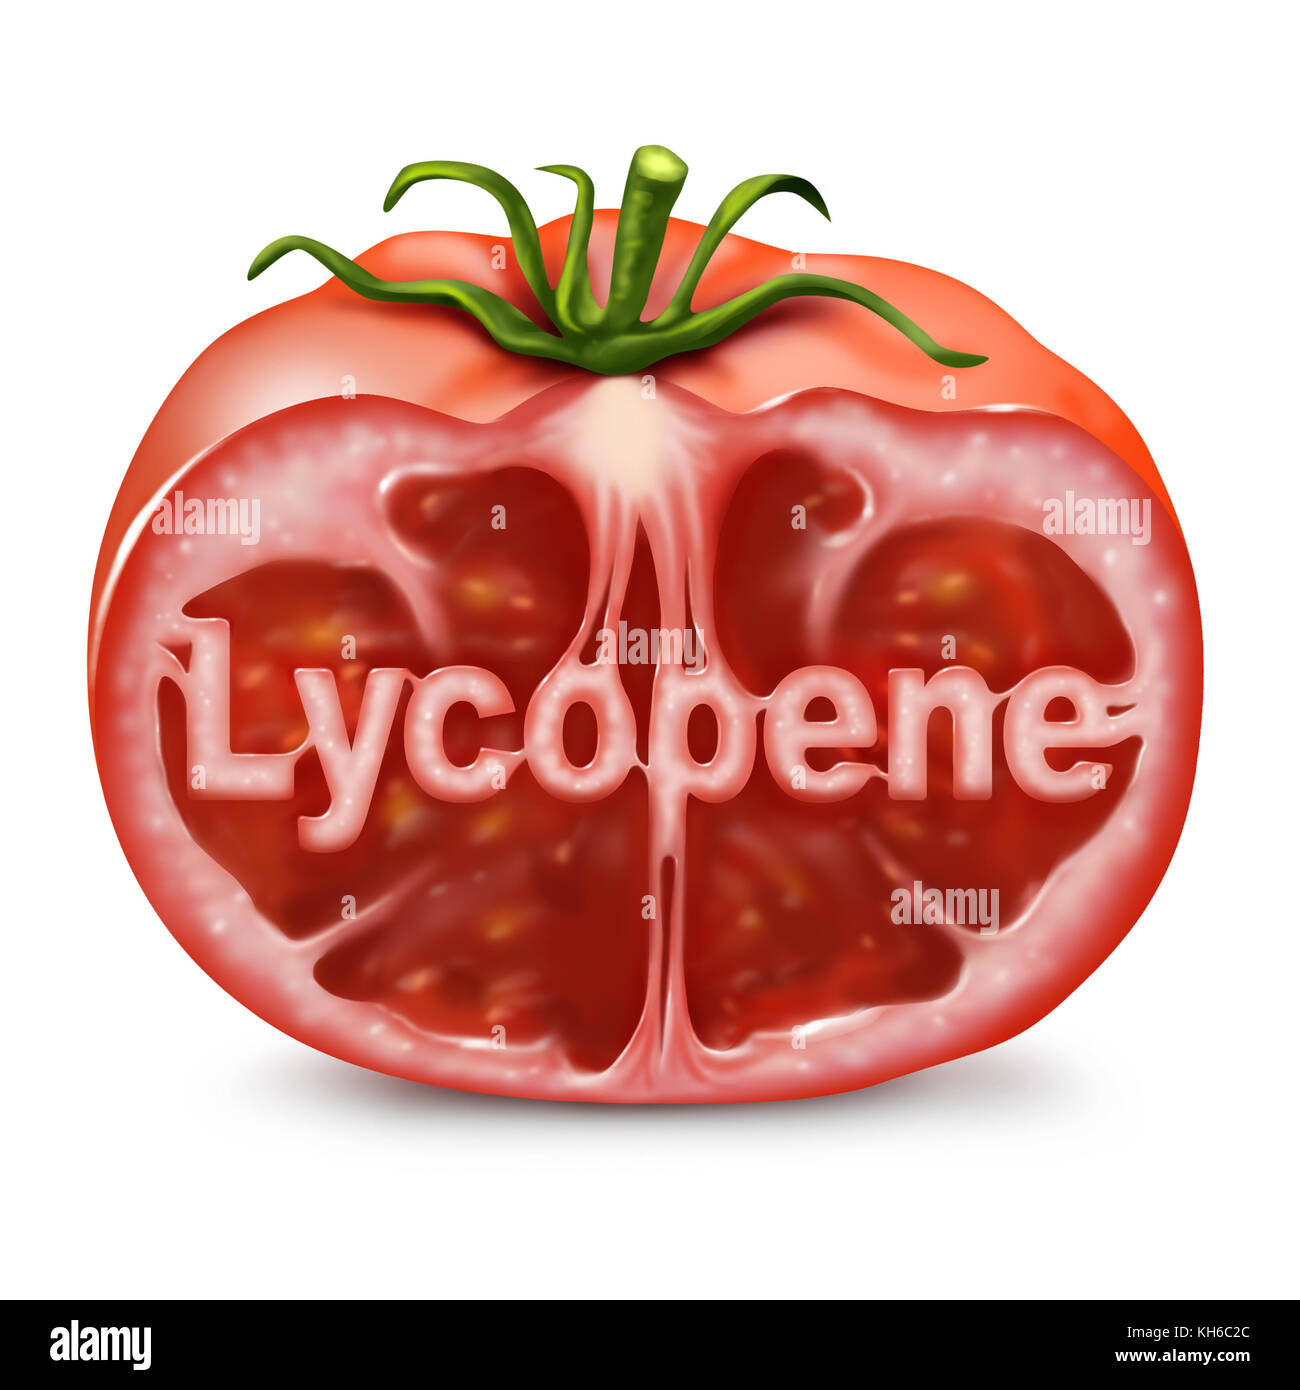 Lycopene tomato concept as a cut red fruit with text inside as a food supplement used to help with cancer prevention as a health nutrient. Stock Photo